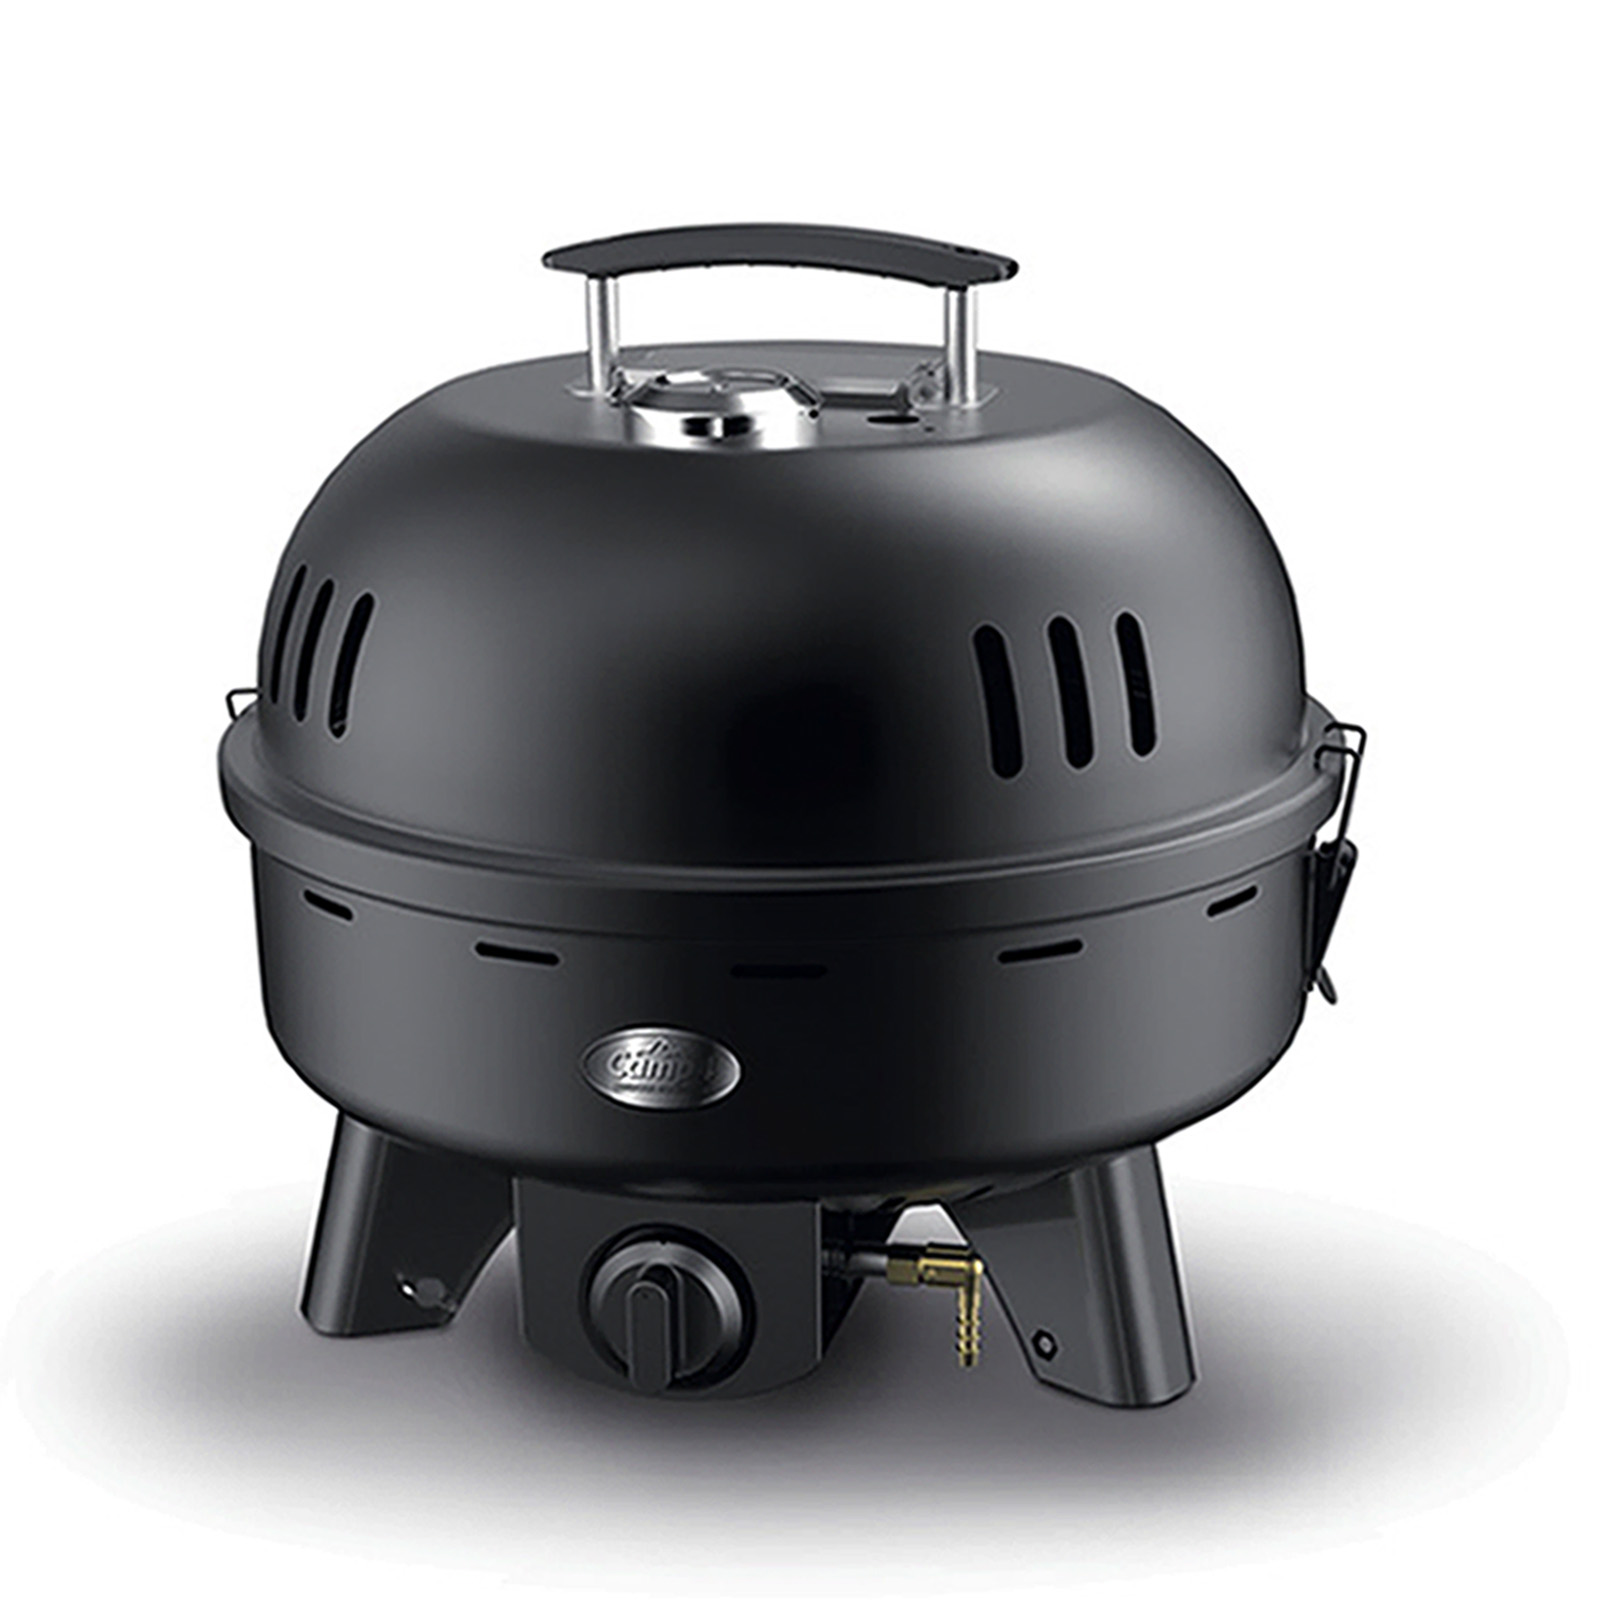 Camp4 Tischgrill Family Gasgrill 50mbar, 4kW, inkl. Deckel mit Thermometer BBQ